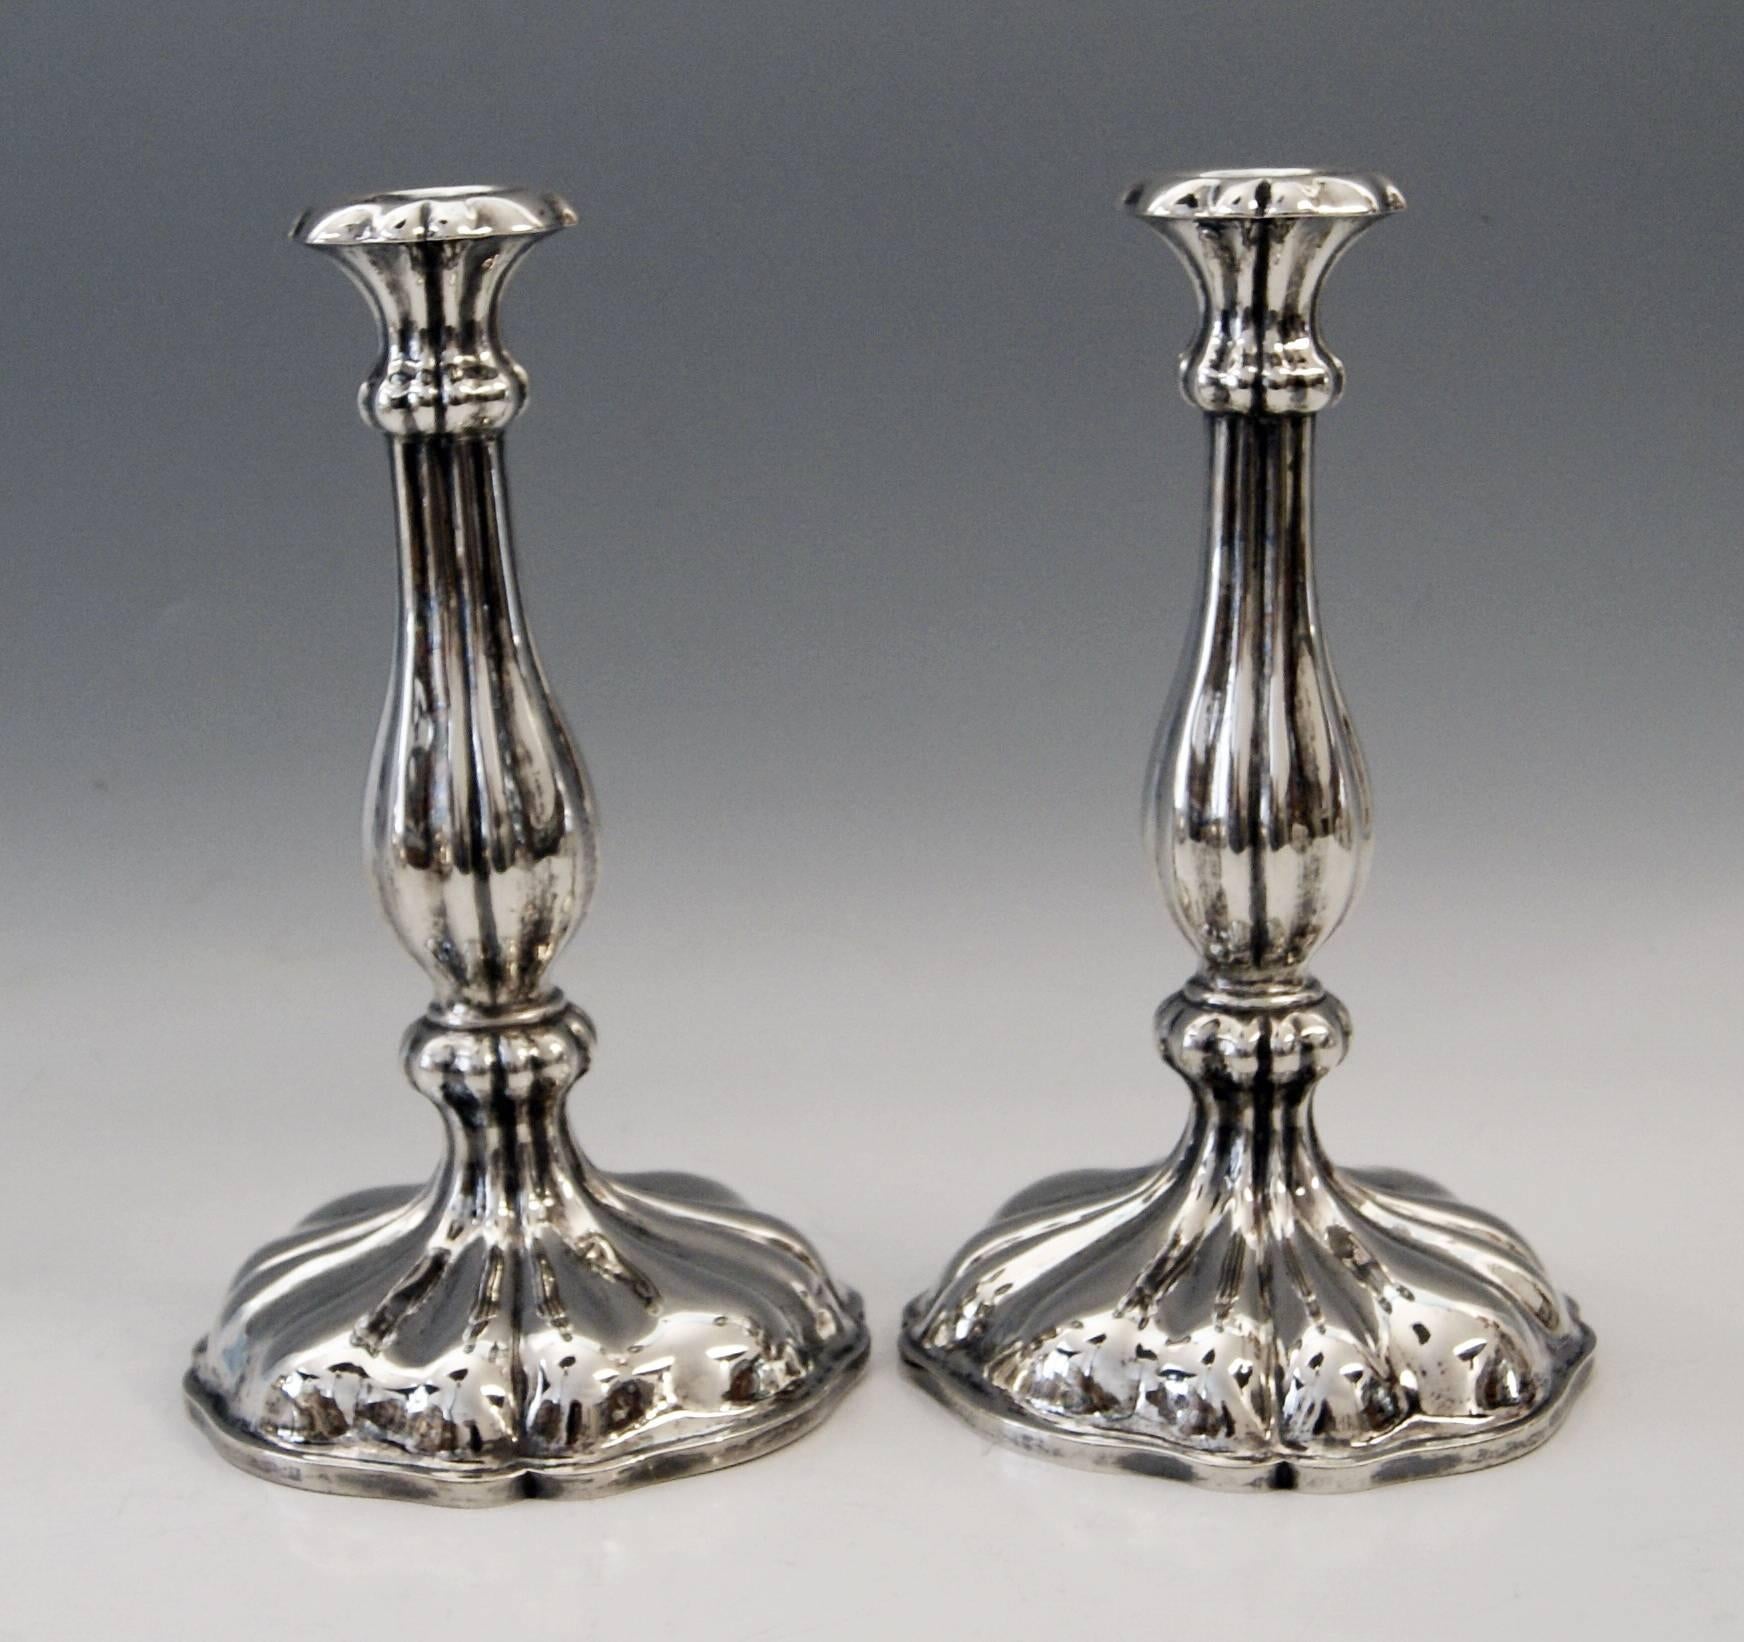 Austrian excellent Biedermeier silver pair of candlesticks,
made 1855.

Very interesting Viennese silver pair of candlesticks of excellent manufacturing quality as well as of elegant appearance.
These candlesticks were made during Viennese late